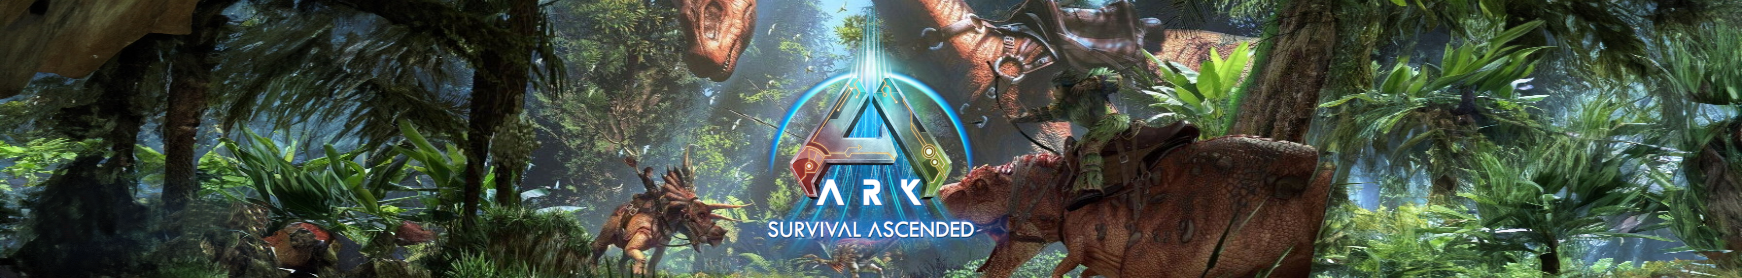 ARK: Survival Ascended Canvas Painting Templates Banner